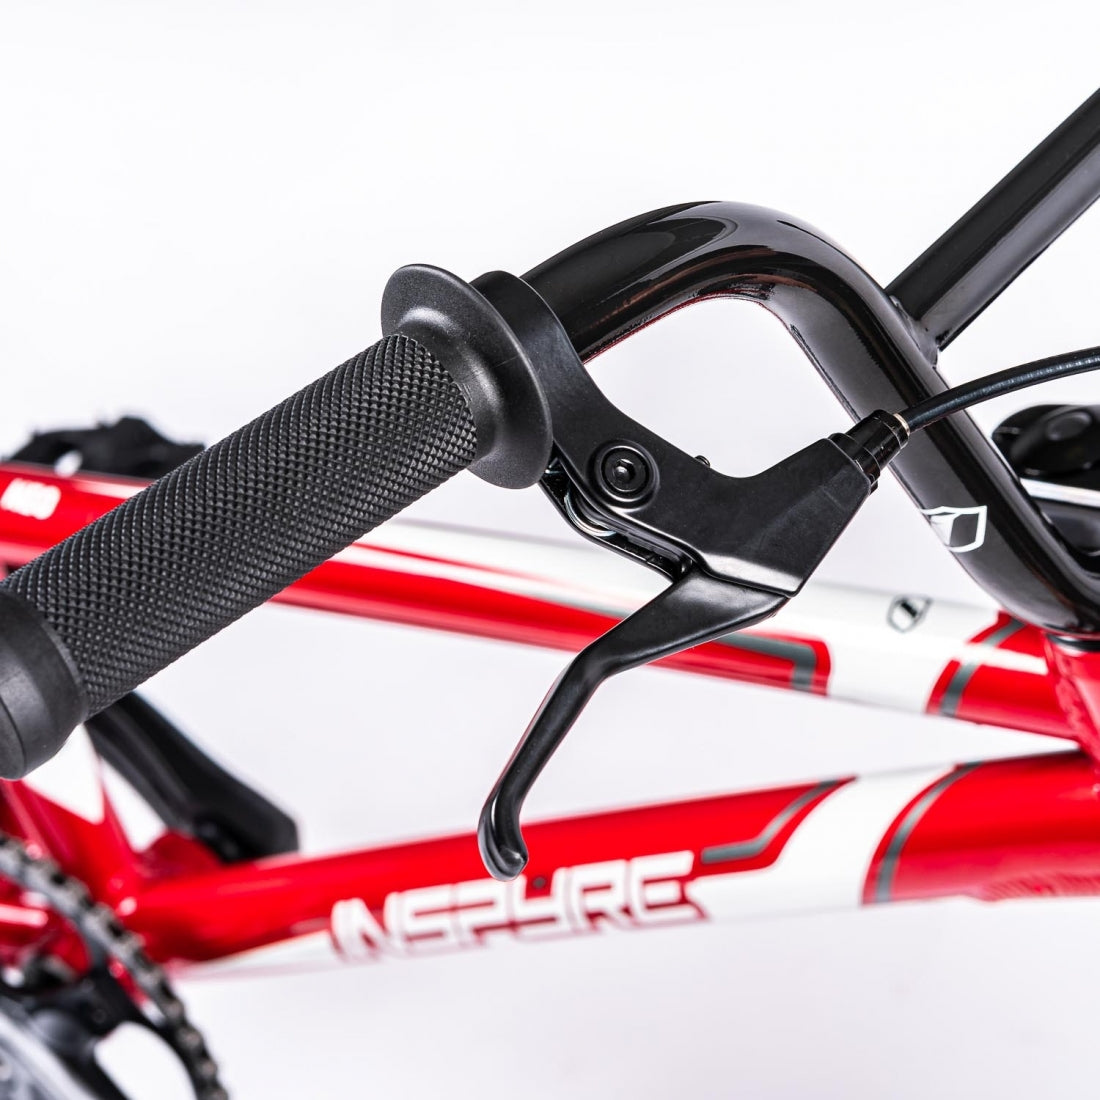 Close-up of an Inspyre Neo Mini Bike handlebar with a brake lever and grip, showcasing part of a red entry-level BMX race frame with the text "nsrrc.